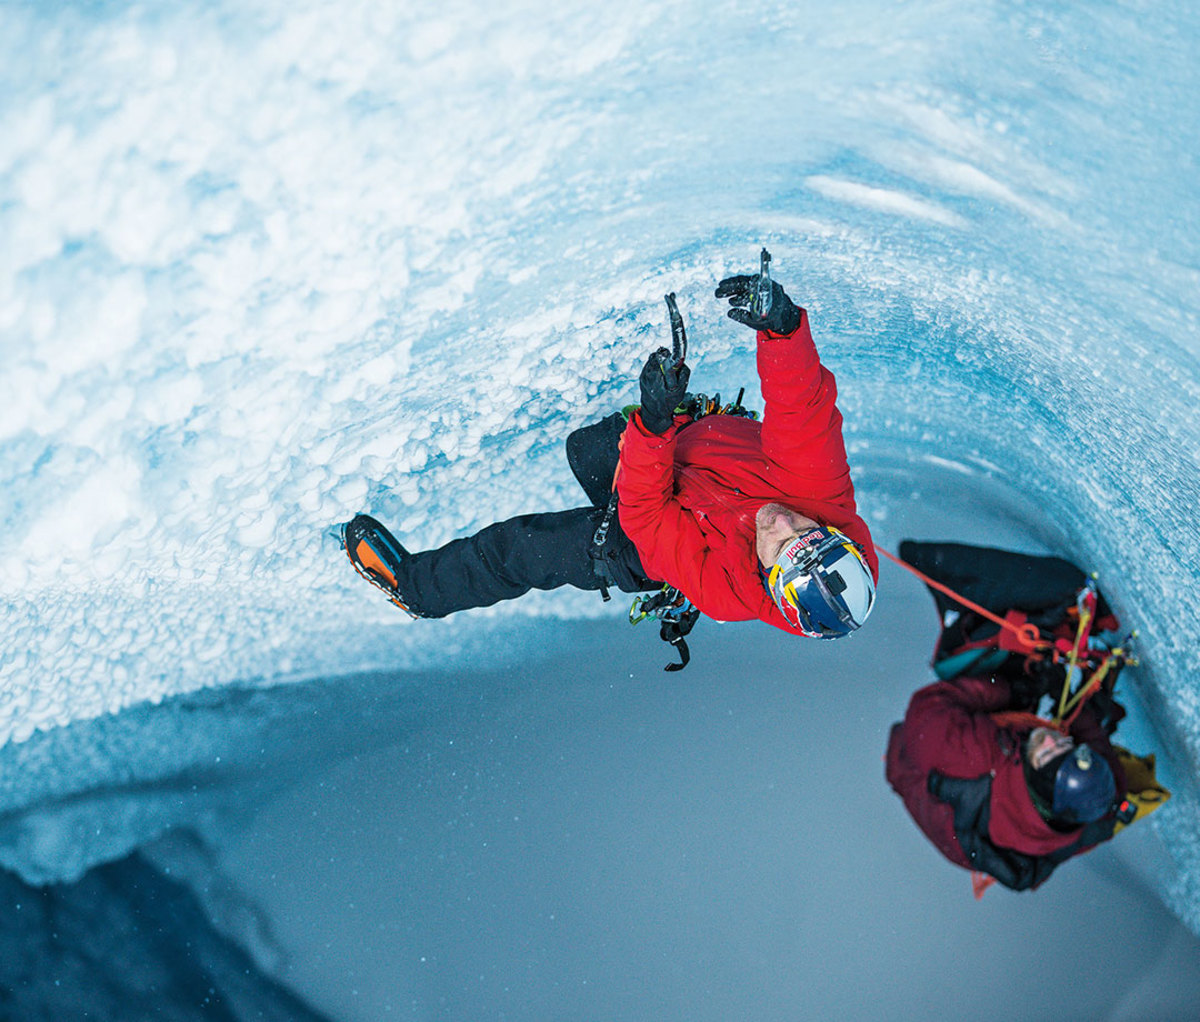 Will Gadd ice climbing in Greenland in bright red jacket